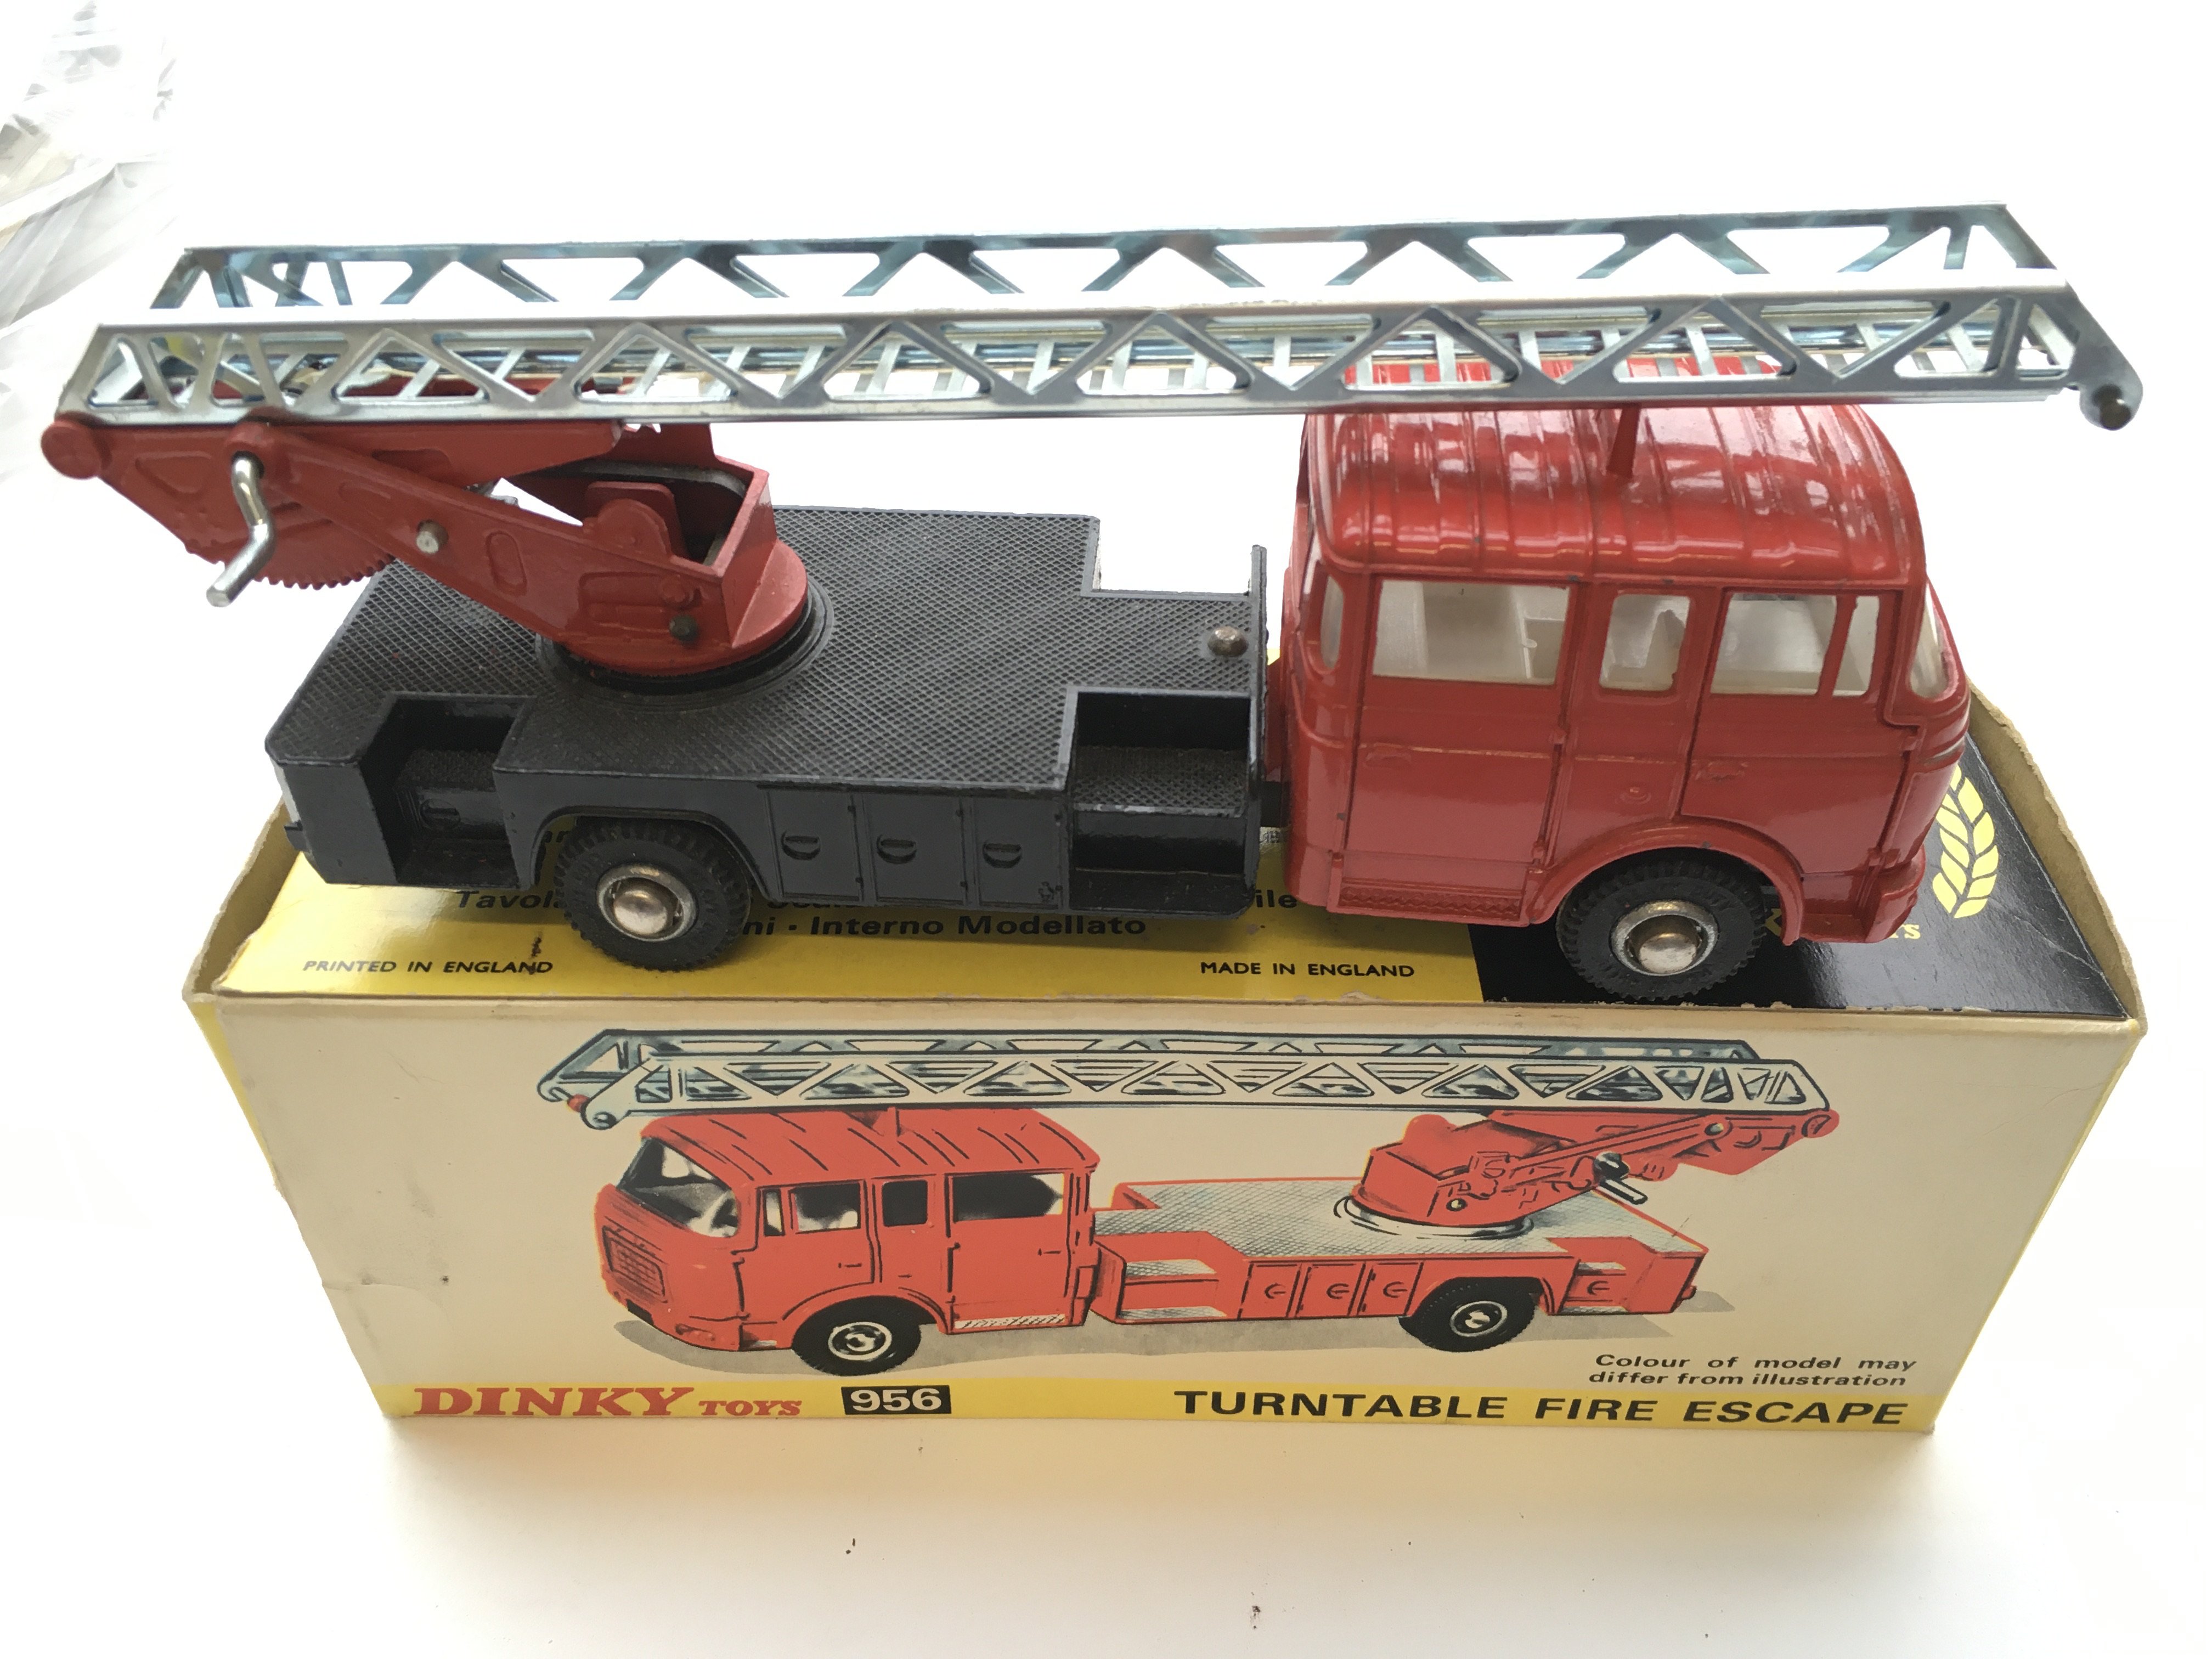 A Dinky Turntable Fire Escape truck #956 and a Jon - Image 2 of 3